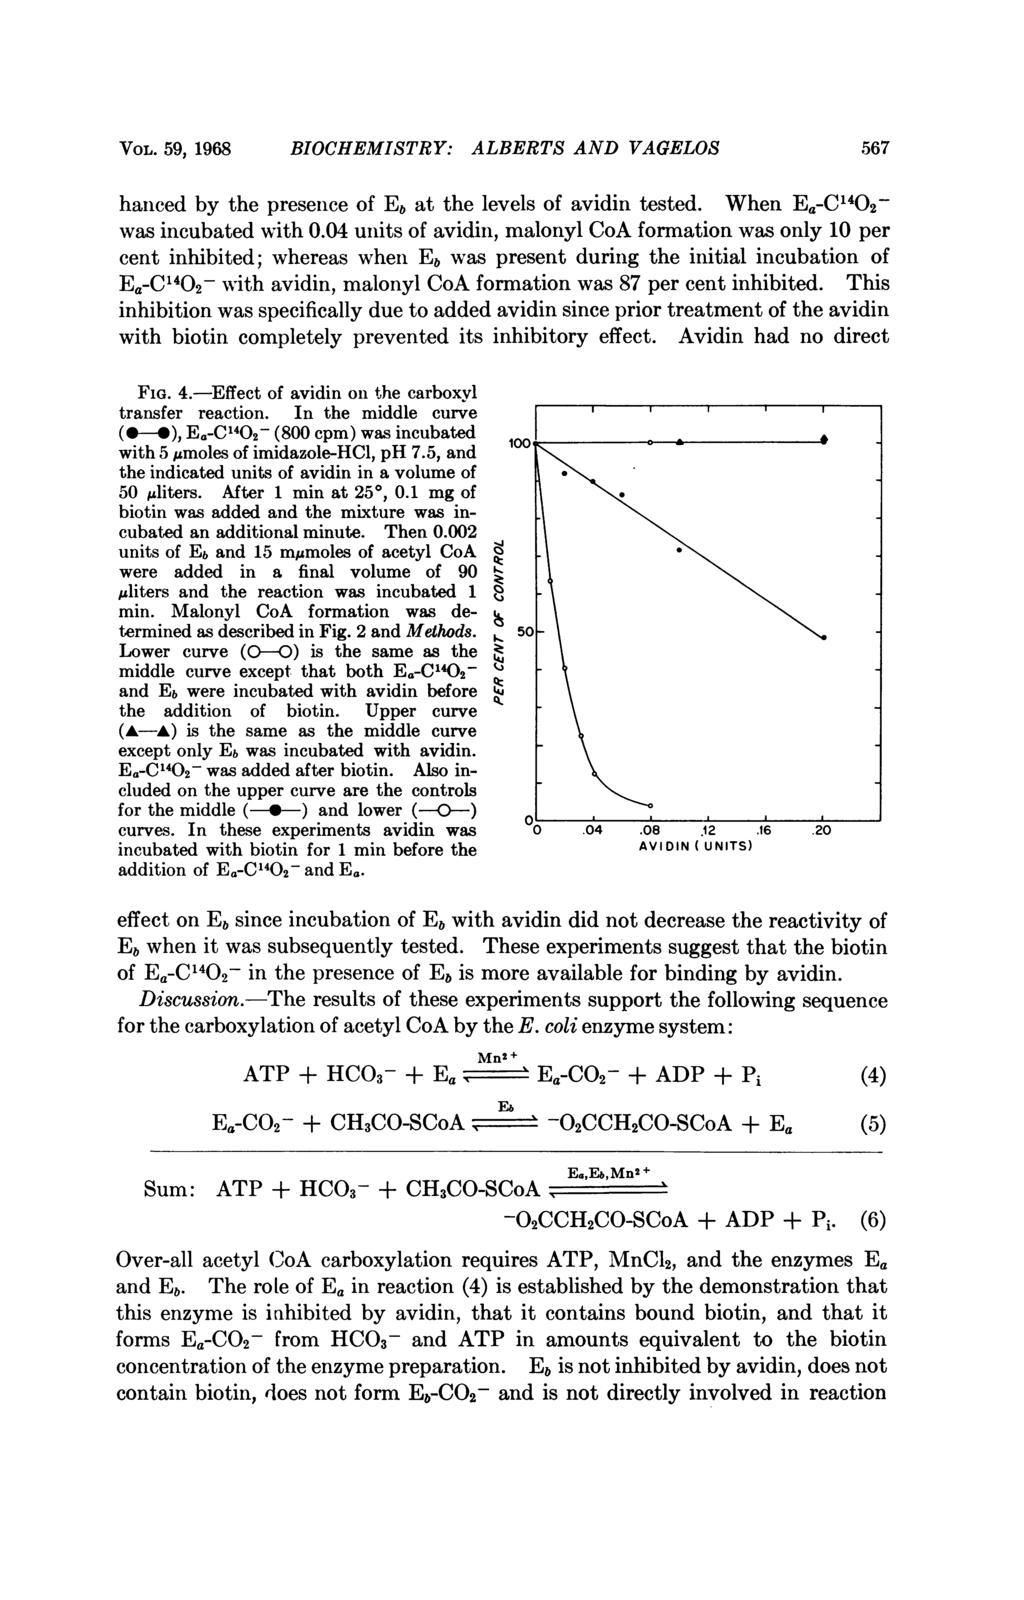 VOL. 59, 1968 BIOCHEMISTRY: ALBERTS AND VAGELOS 567 hanced by the presence of Eb at the levels of avidin tested. When Ea-C142- was incubated with.